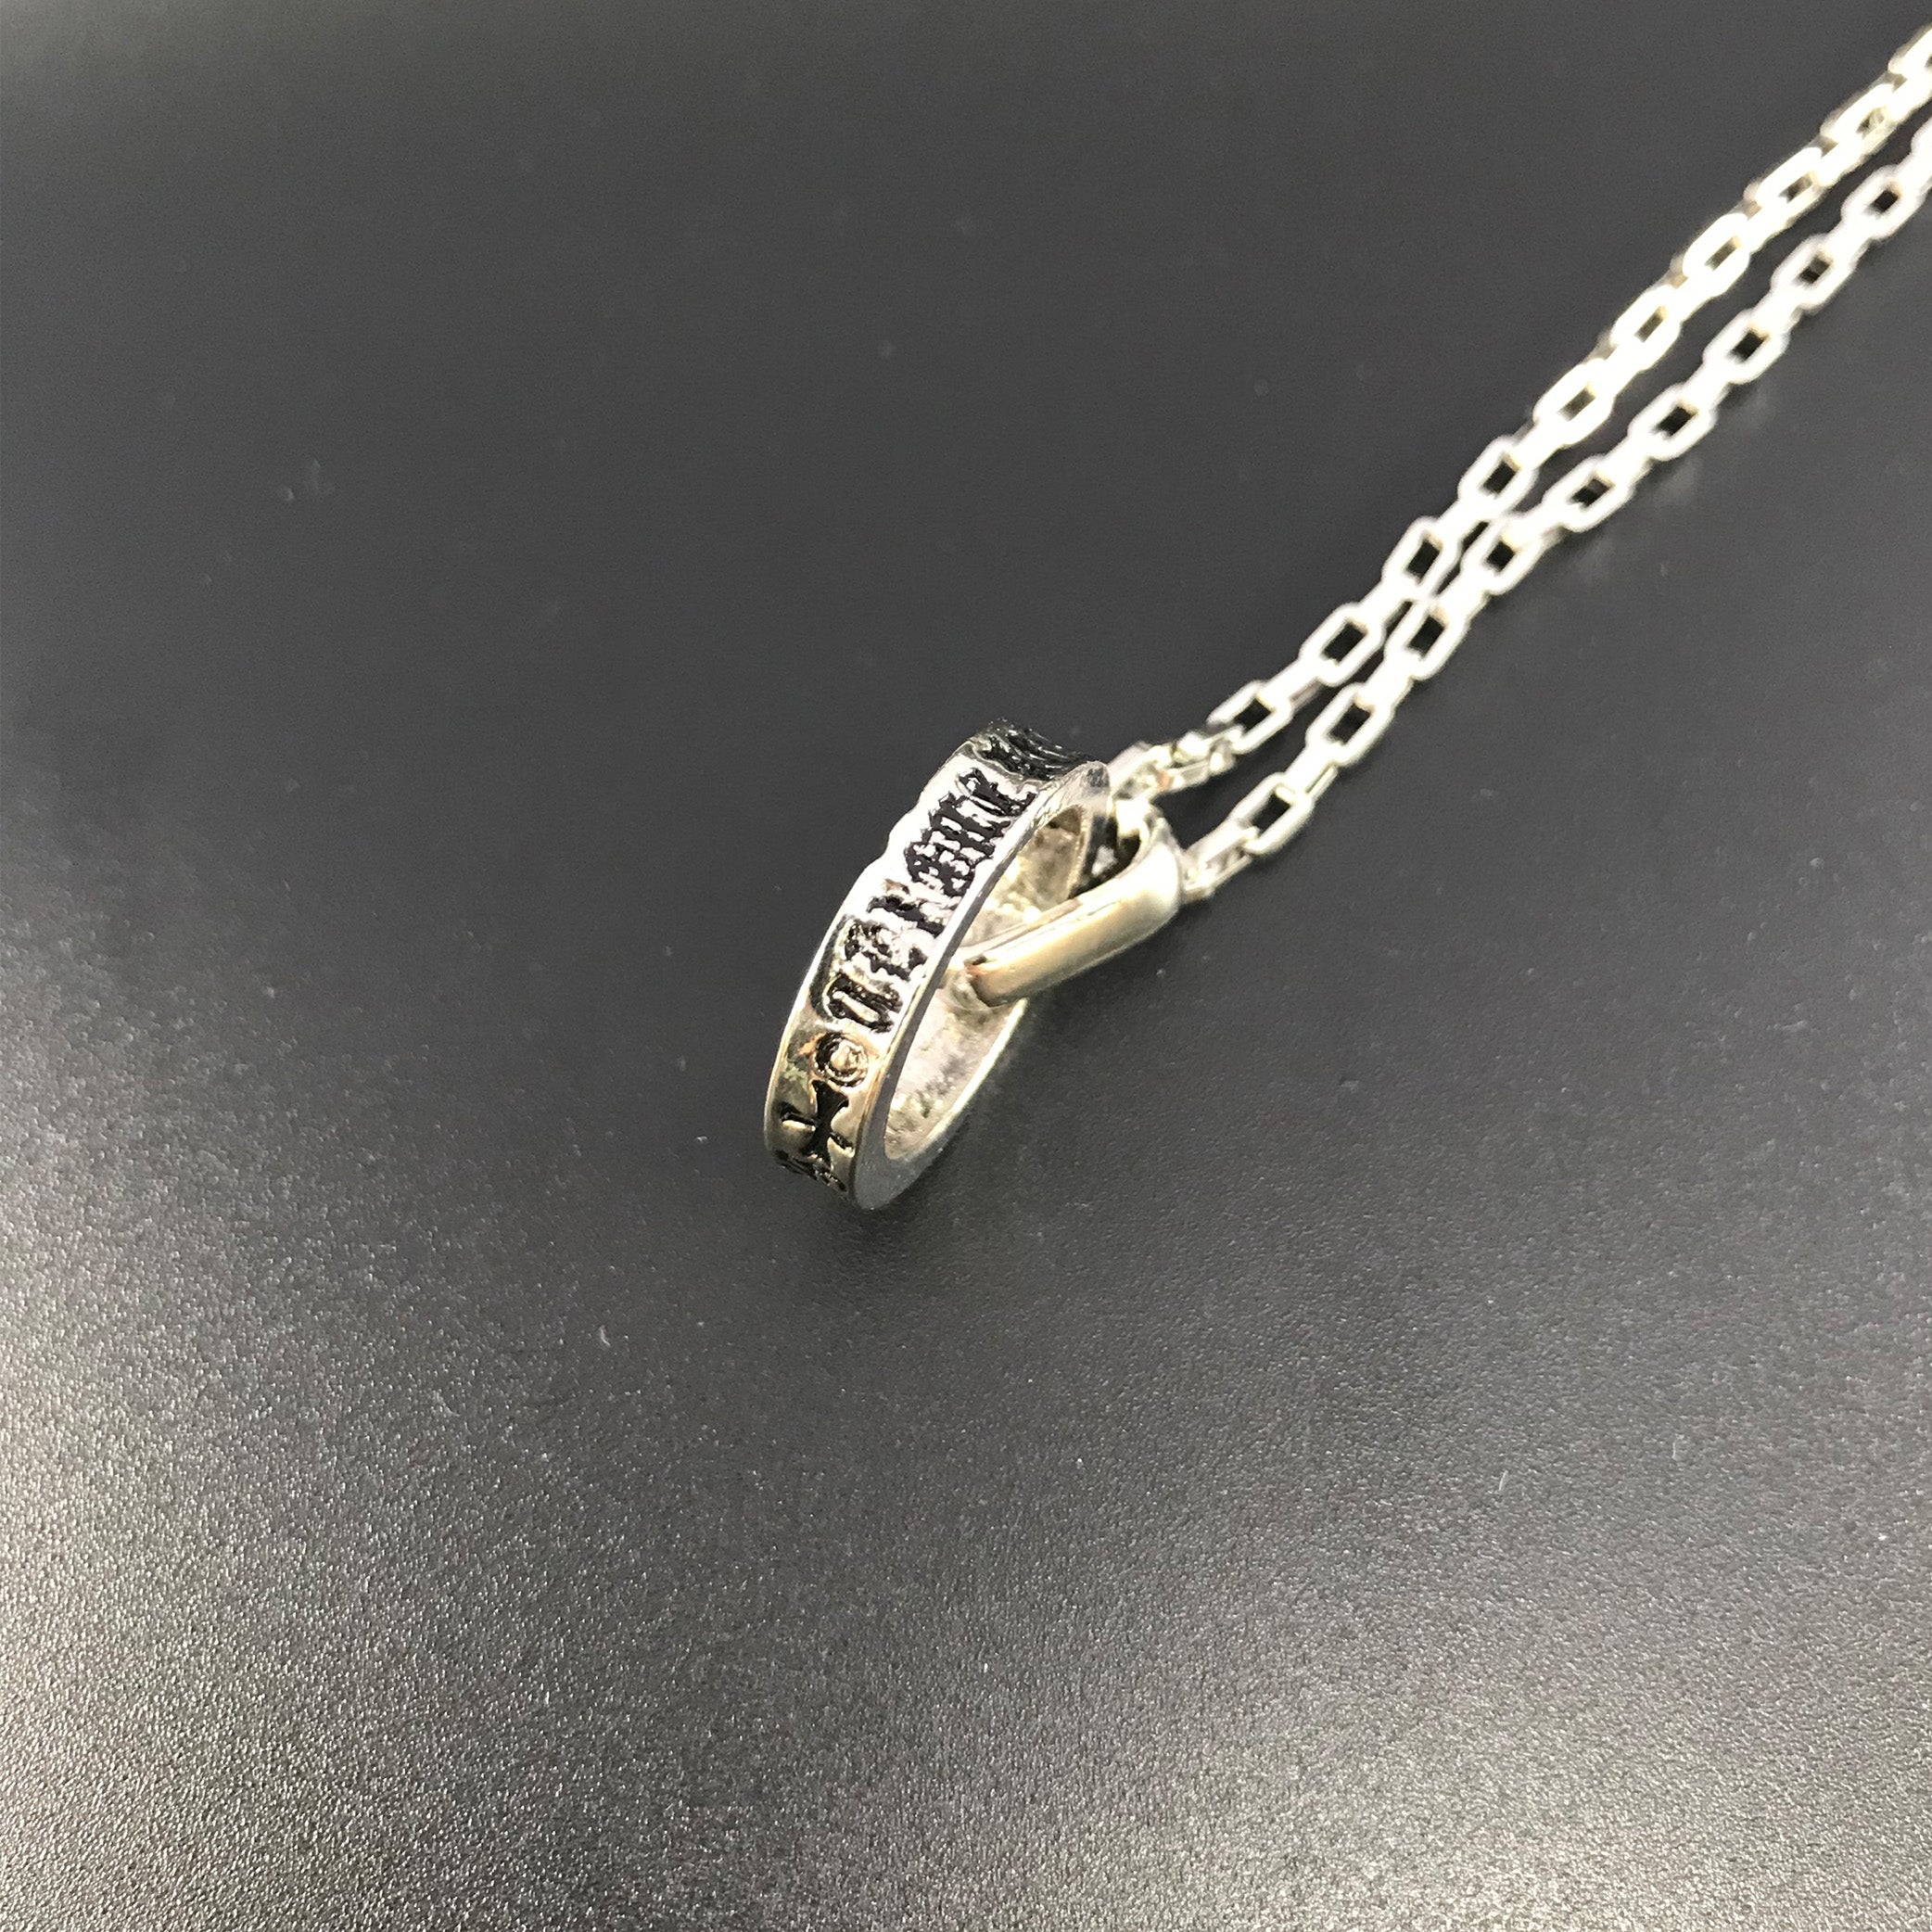 Men Necklace with Ring Pendant